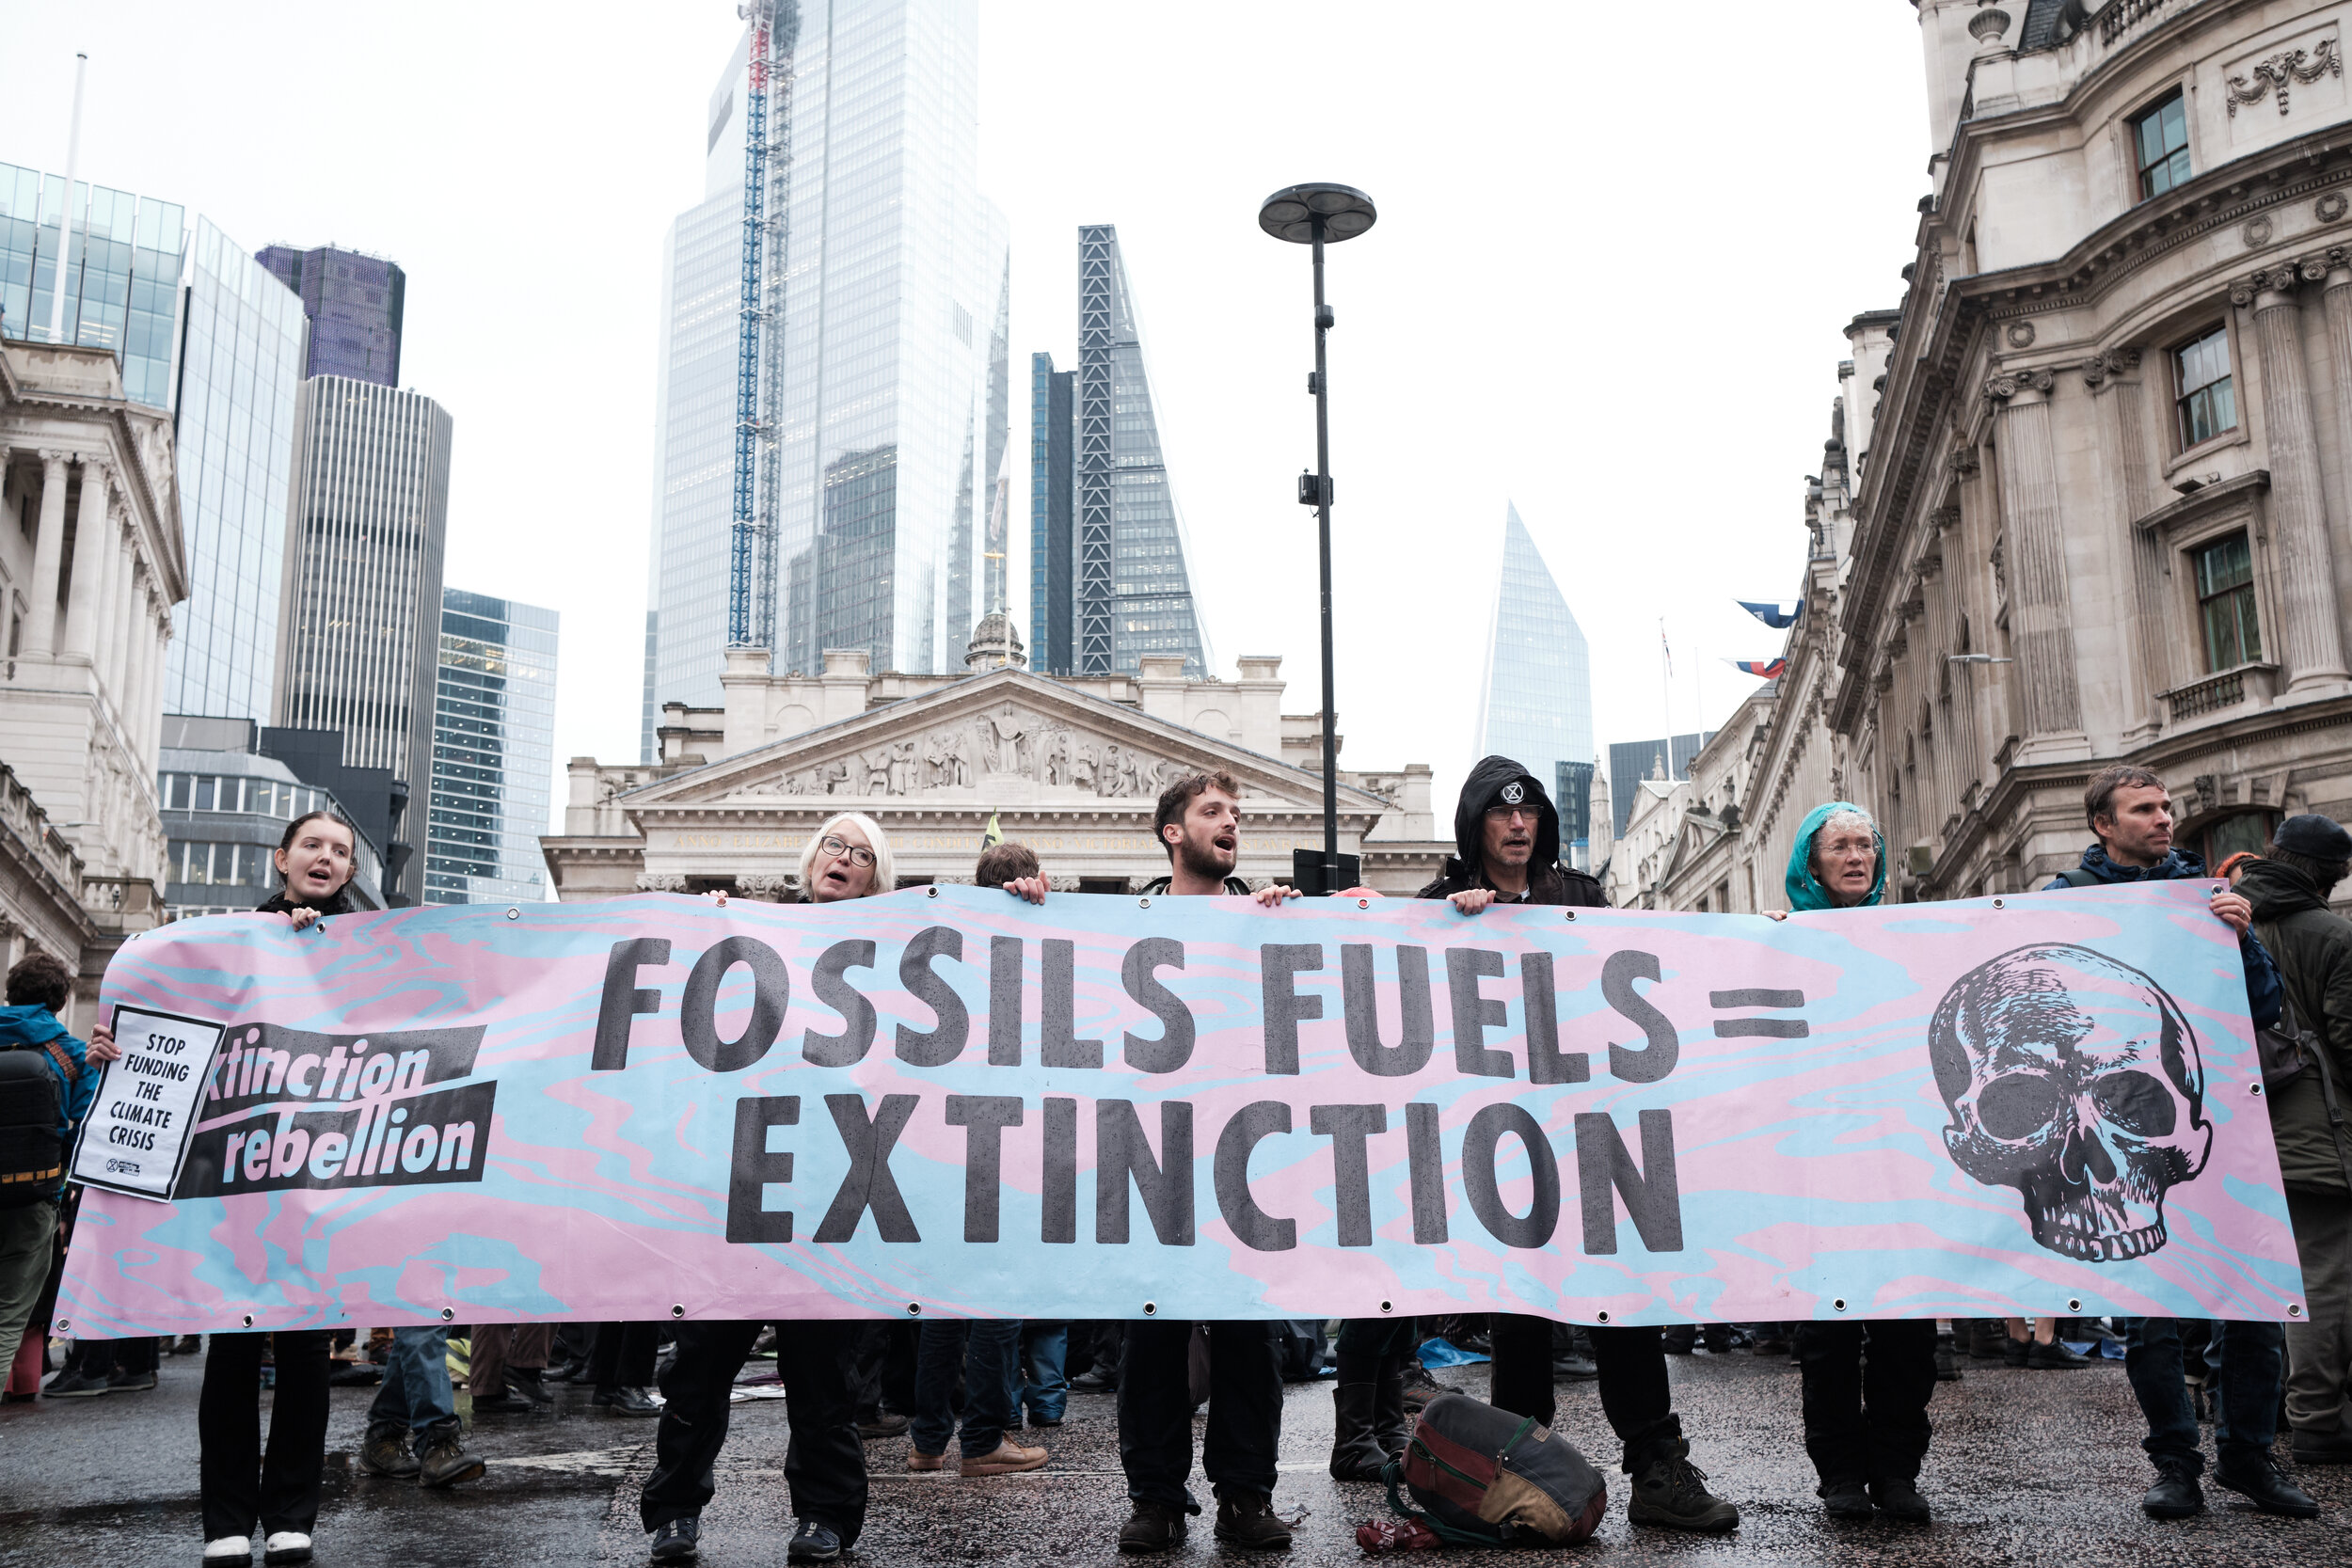   7am.  Hundreds of activists blocked routes around Bank Junction and the City of London. An analysis by Rainforest Action Network showed that 33 big banks provided $654bn to 1800 fossil fuel companies last year, equivalent to 70% of the total capita